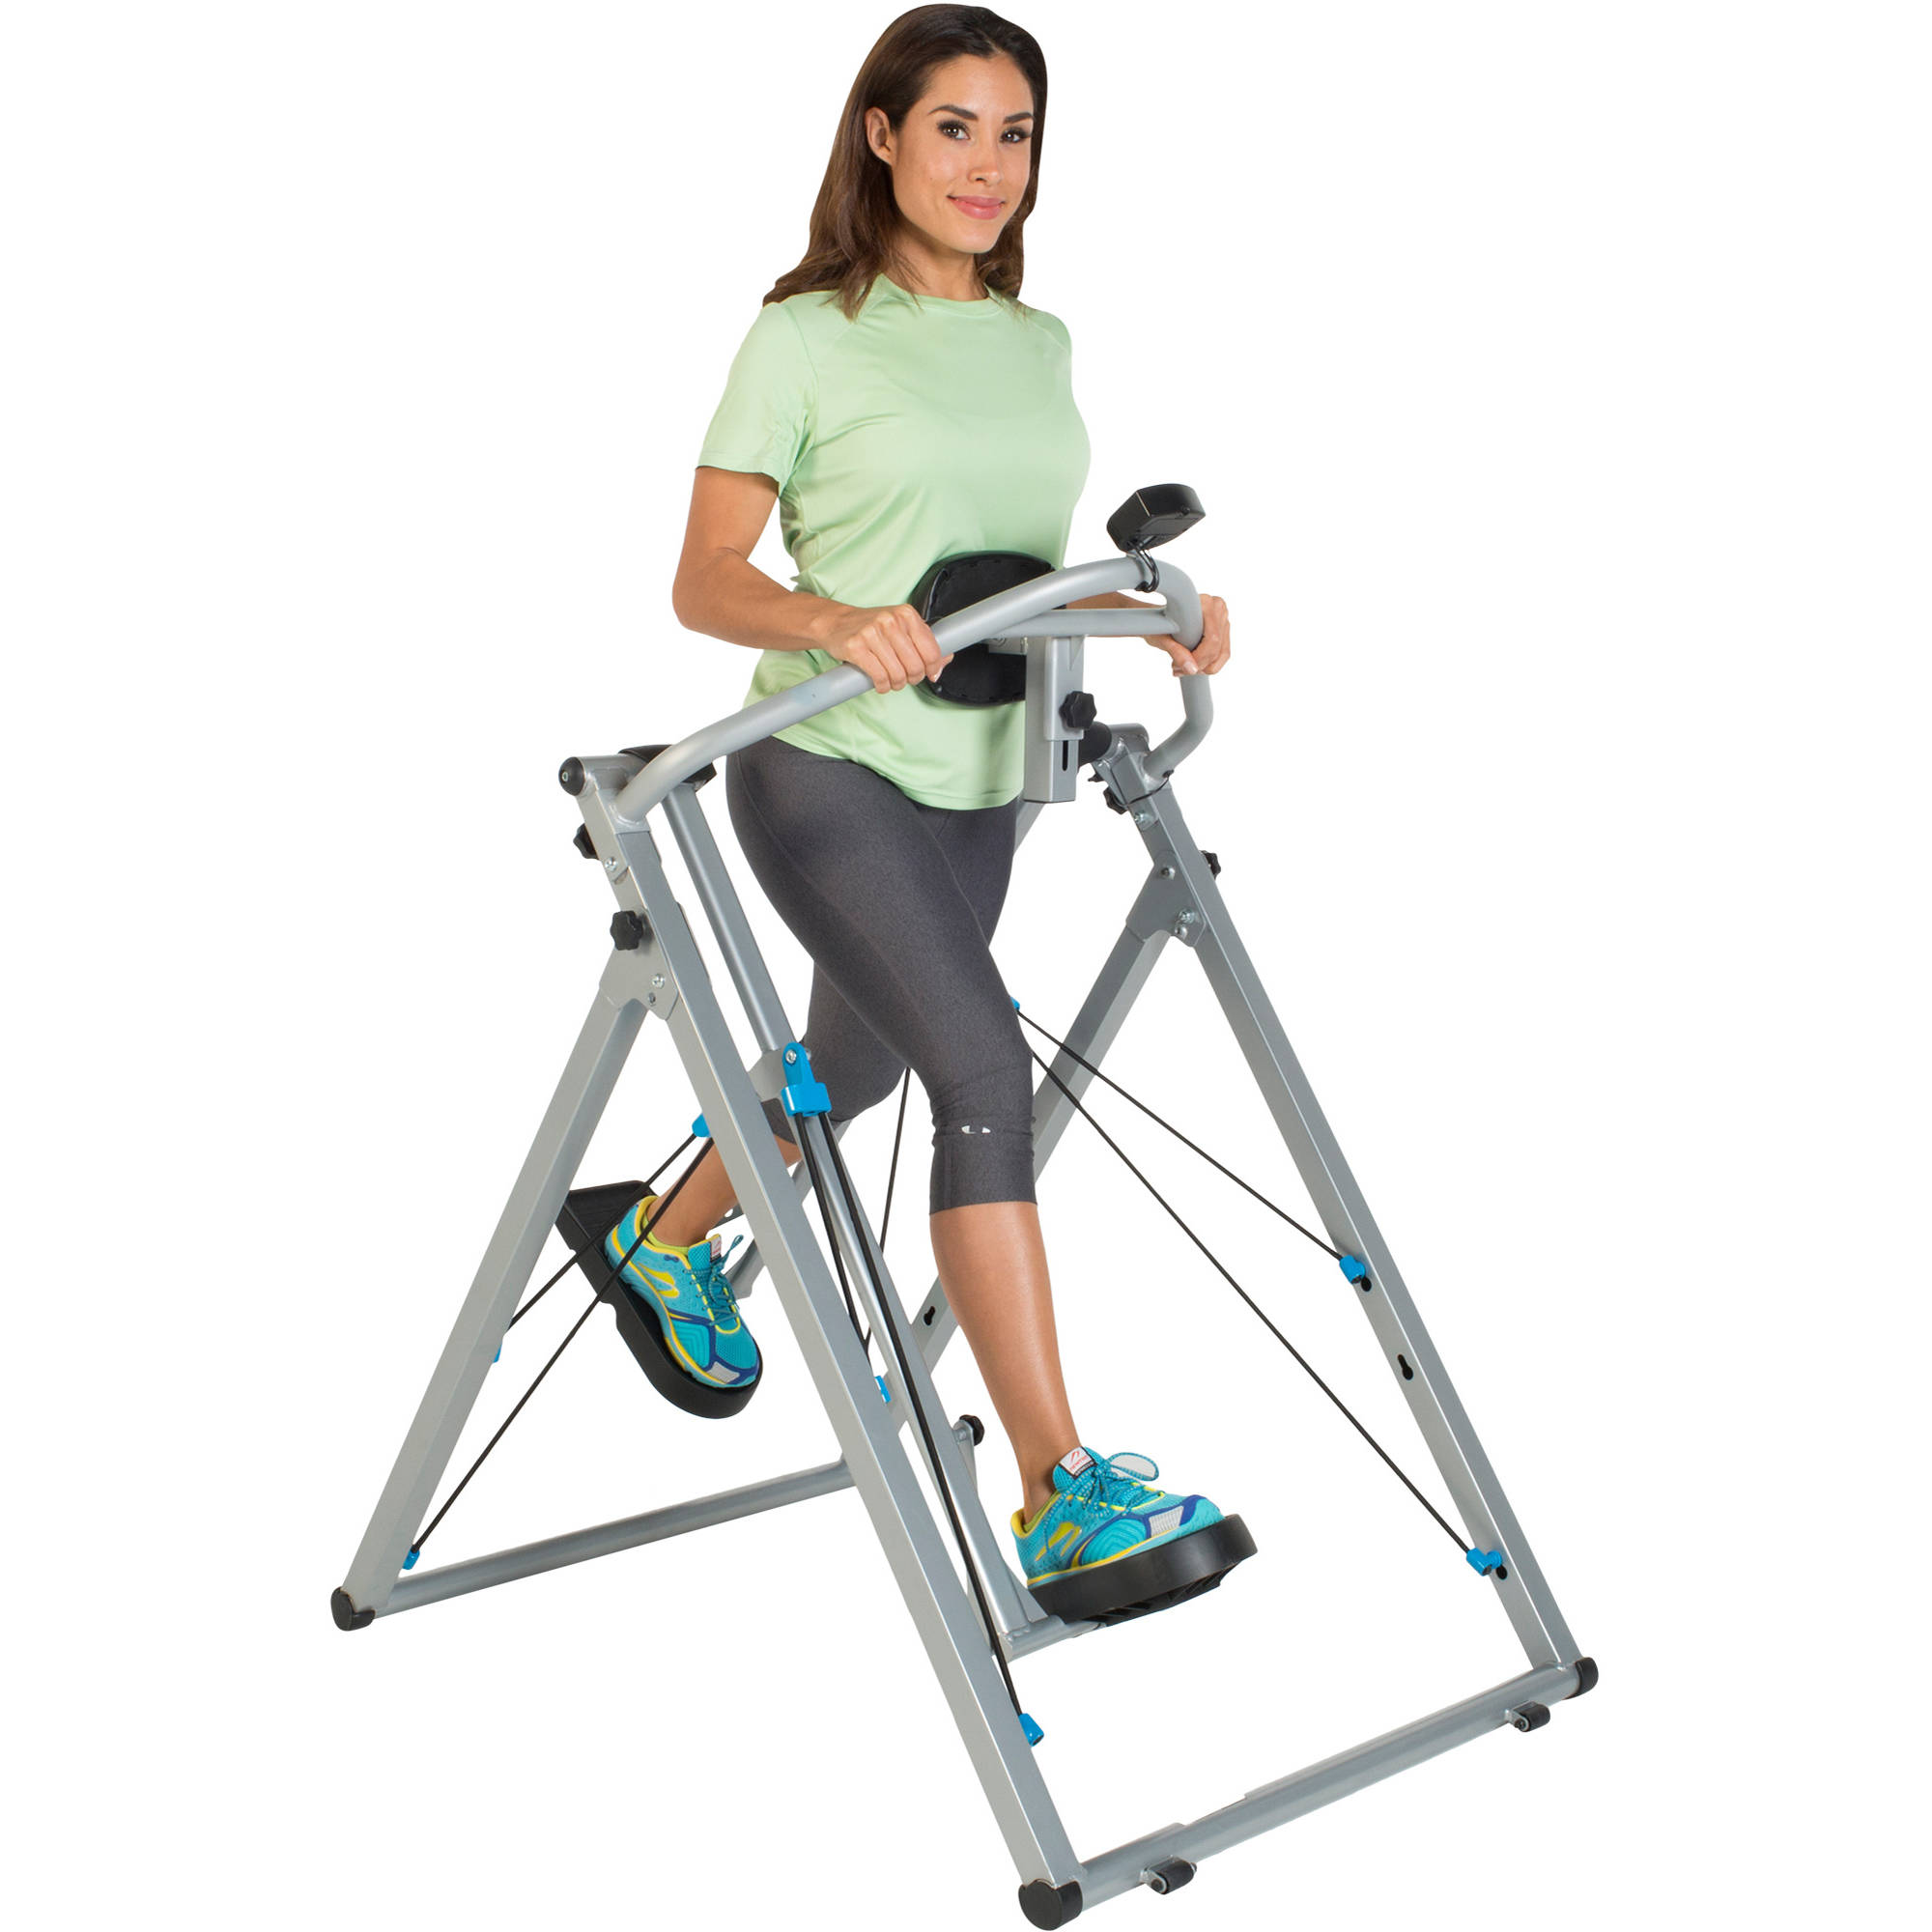 PROGEAR Freedom 48" Stride Air Walker Elliptical LS1 with Heart Pulse Monitor - image 1 of 25